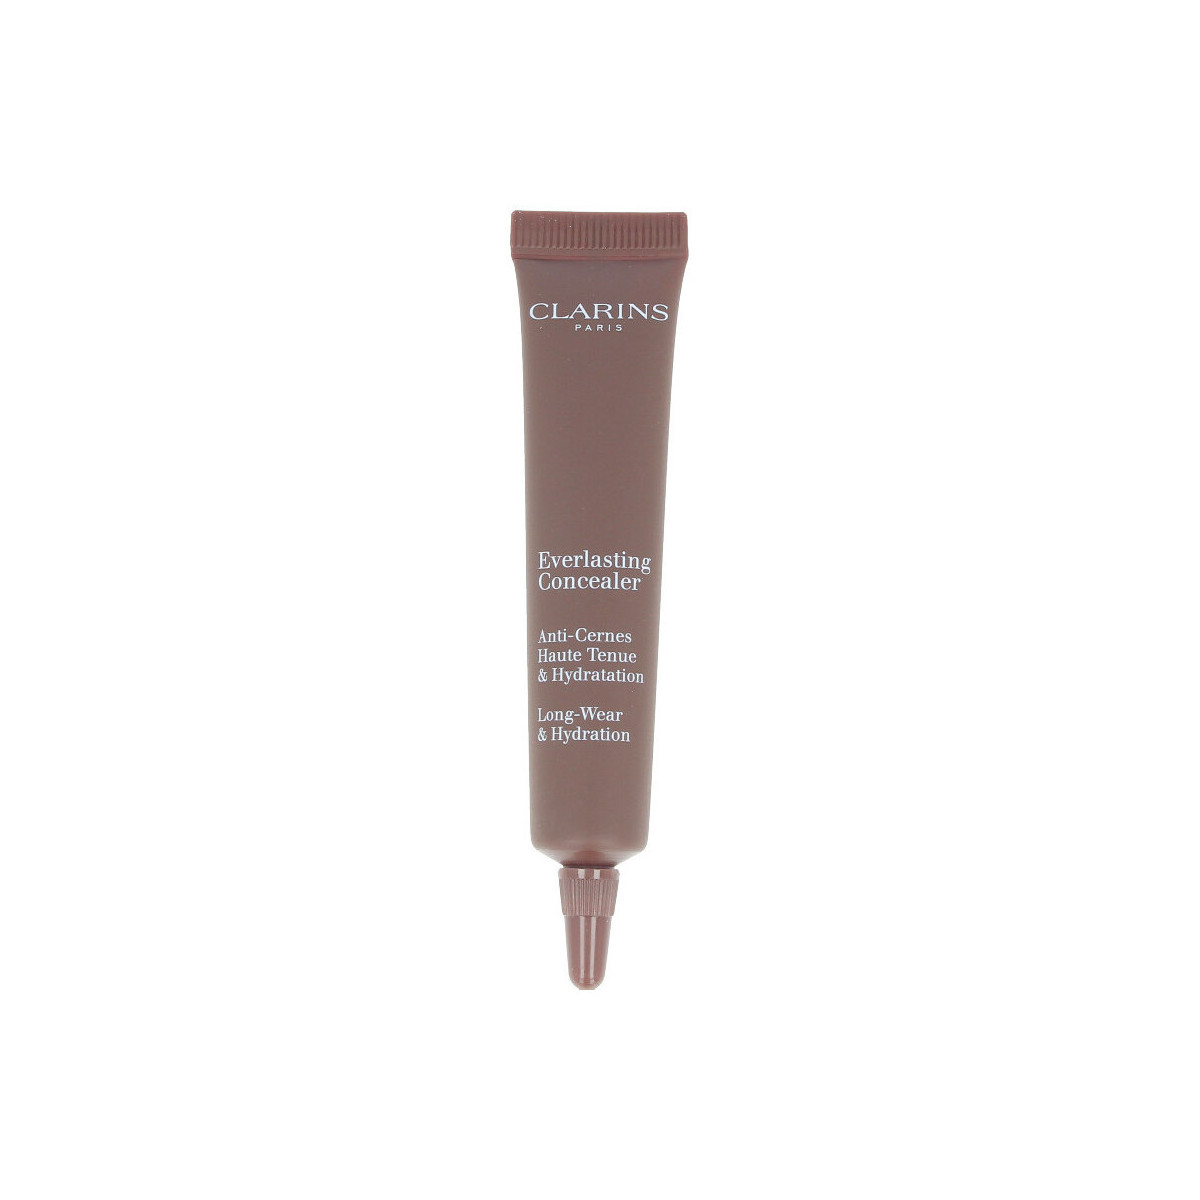 Beauty Make-up & Foundation  Clarins Everlasting Concealer 06-extra Deep 